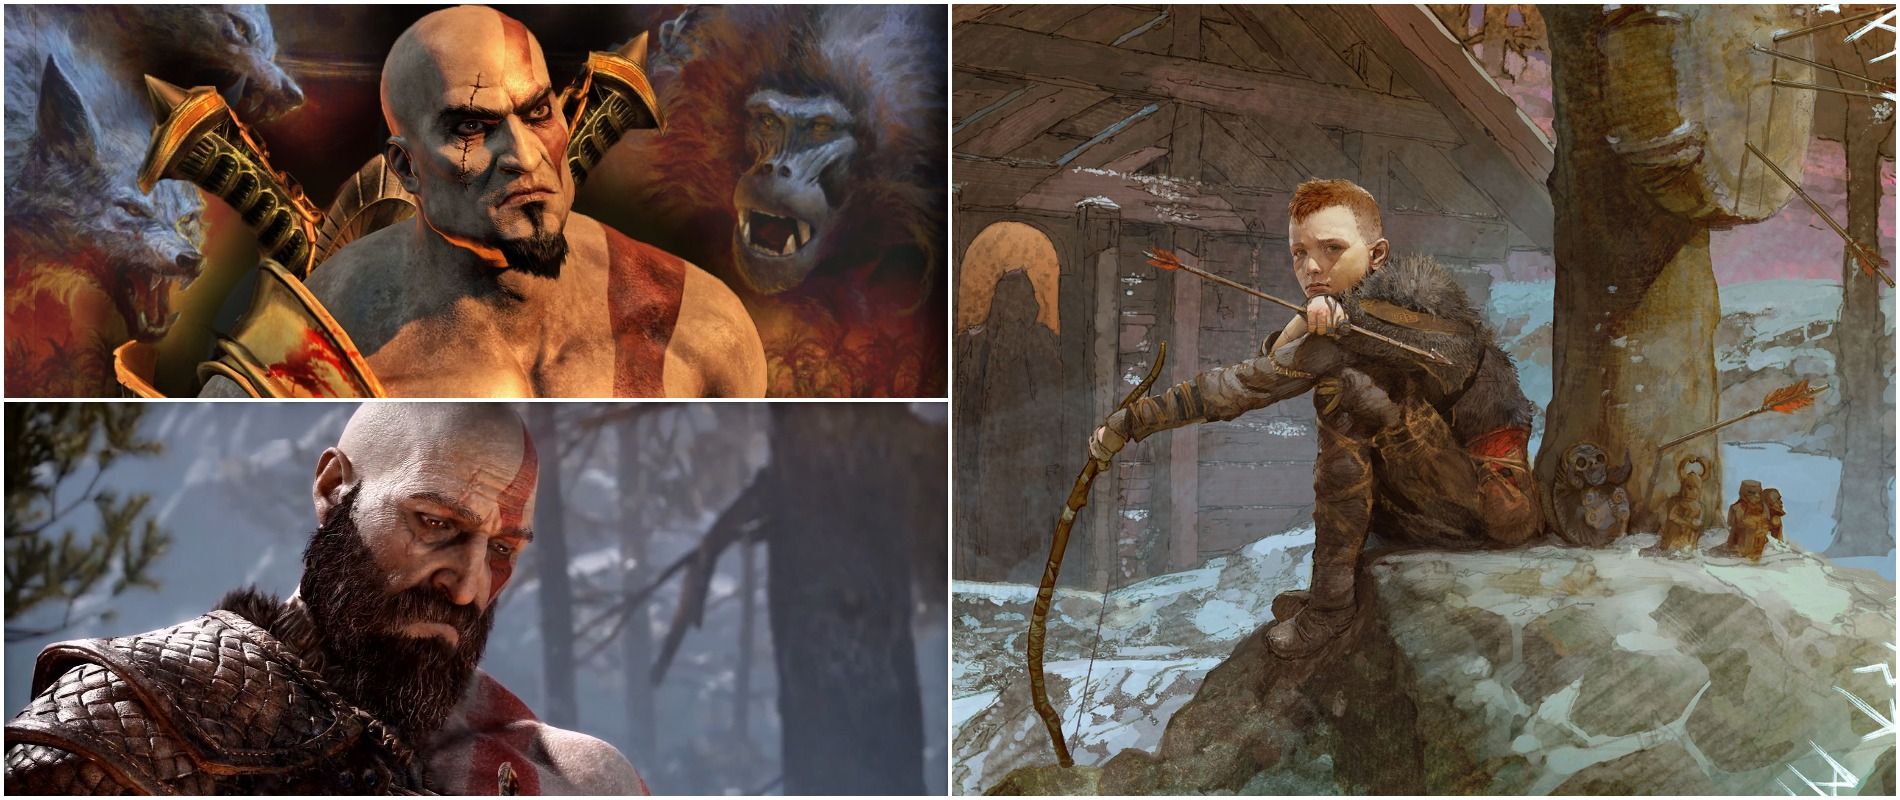 God of War prequel comic will explain what happened after God of War 3